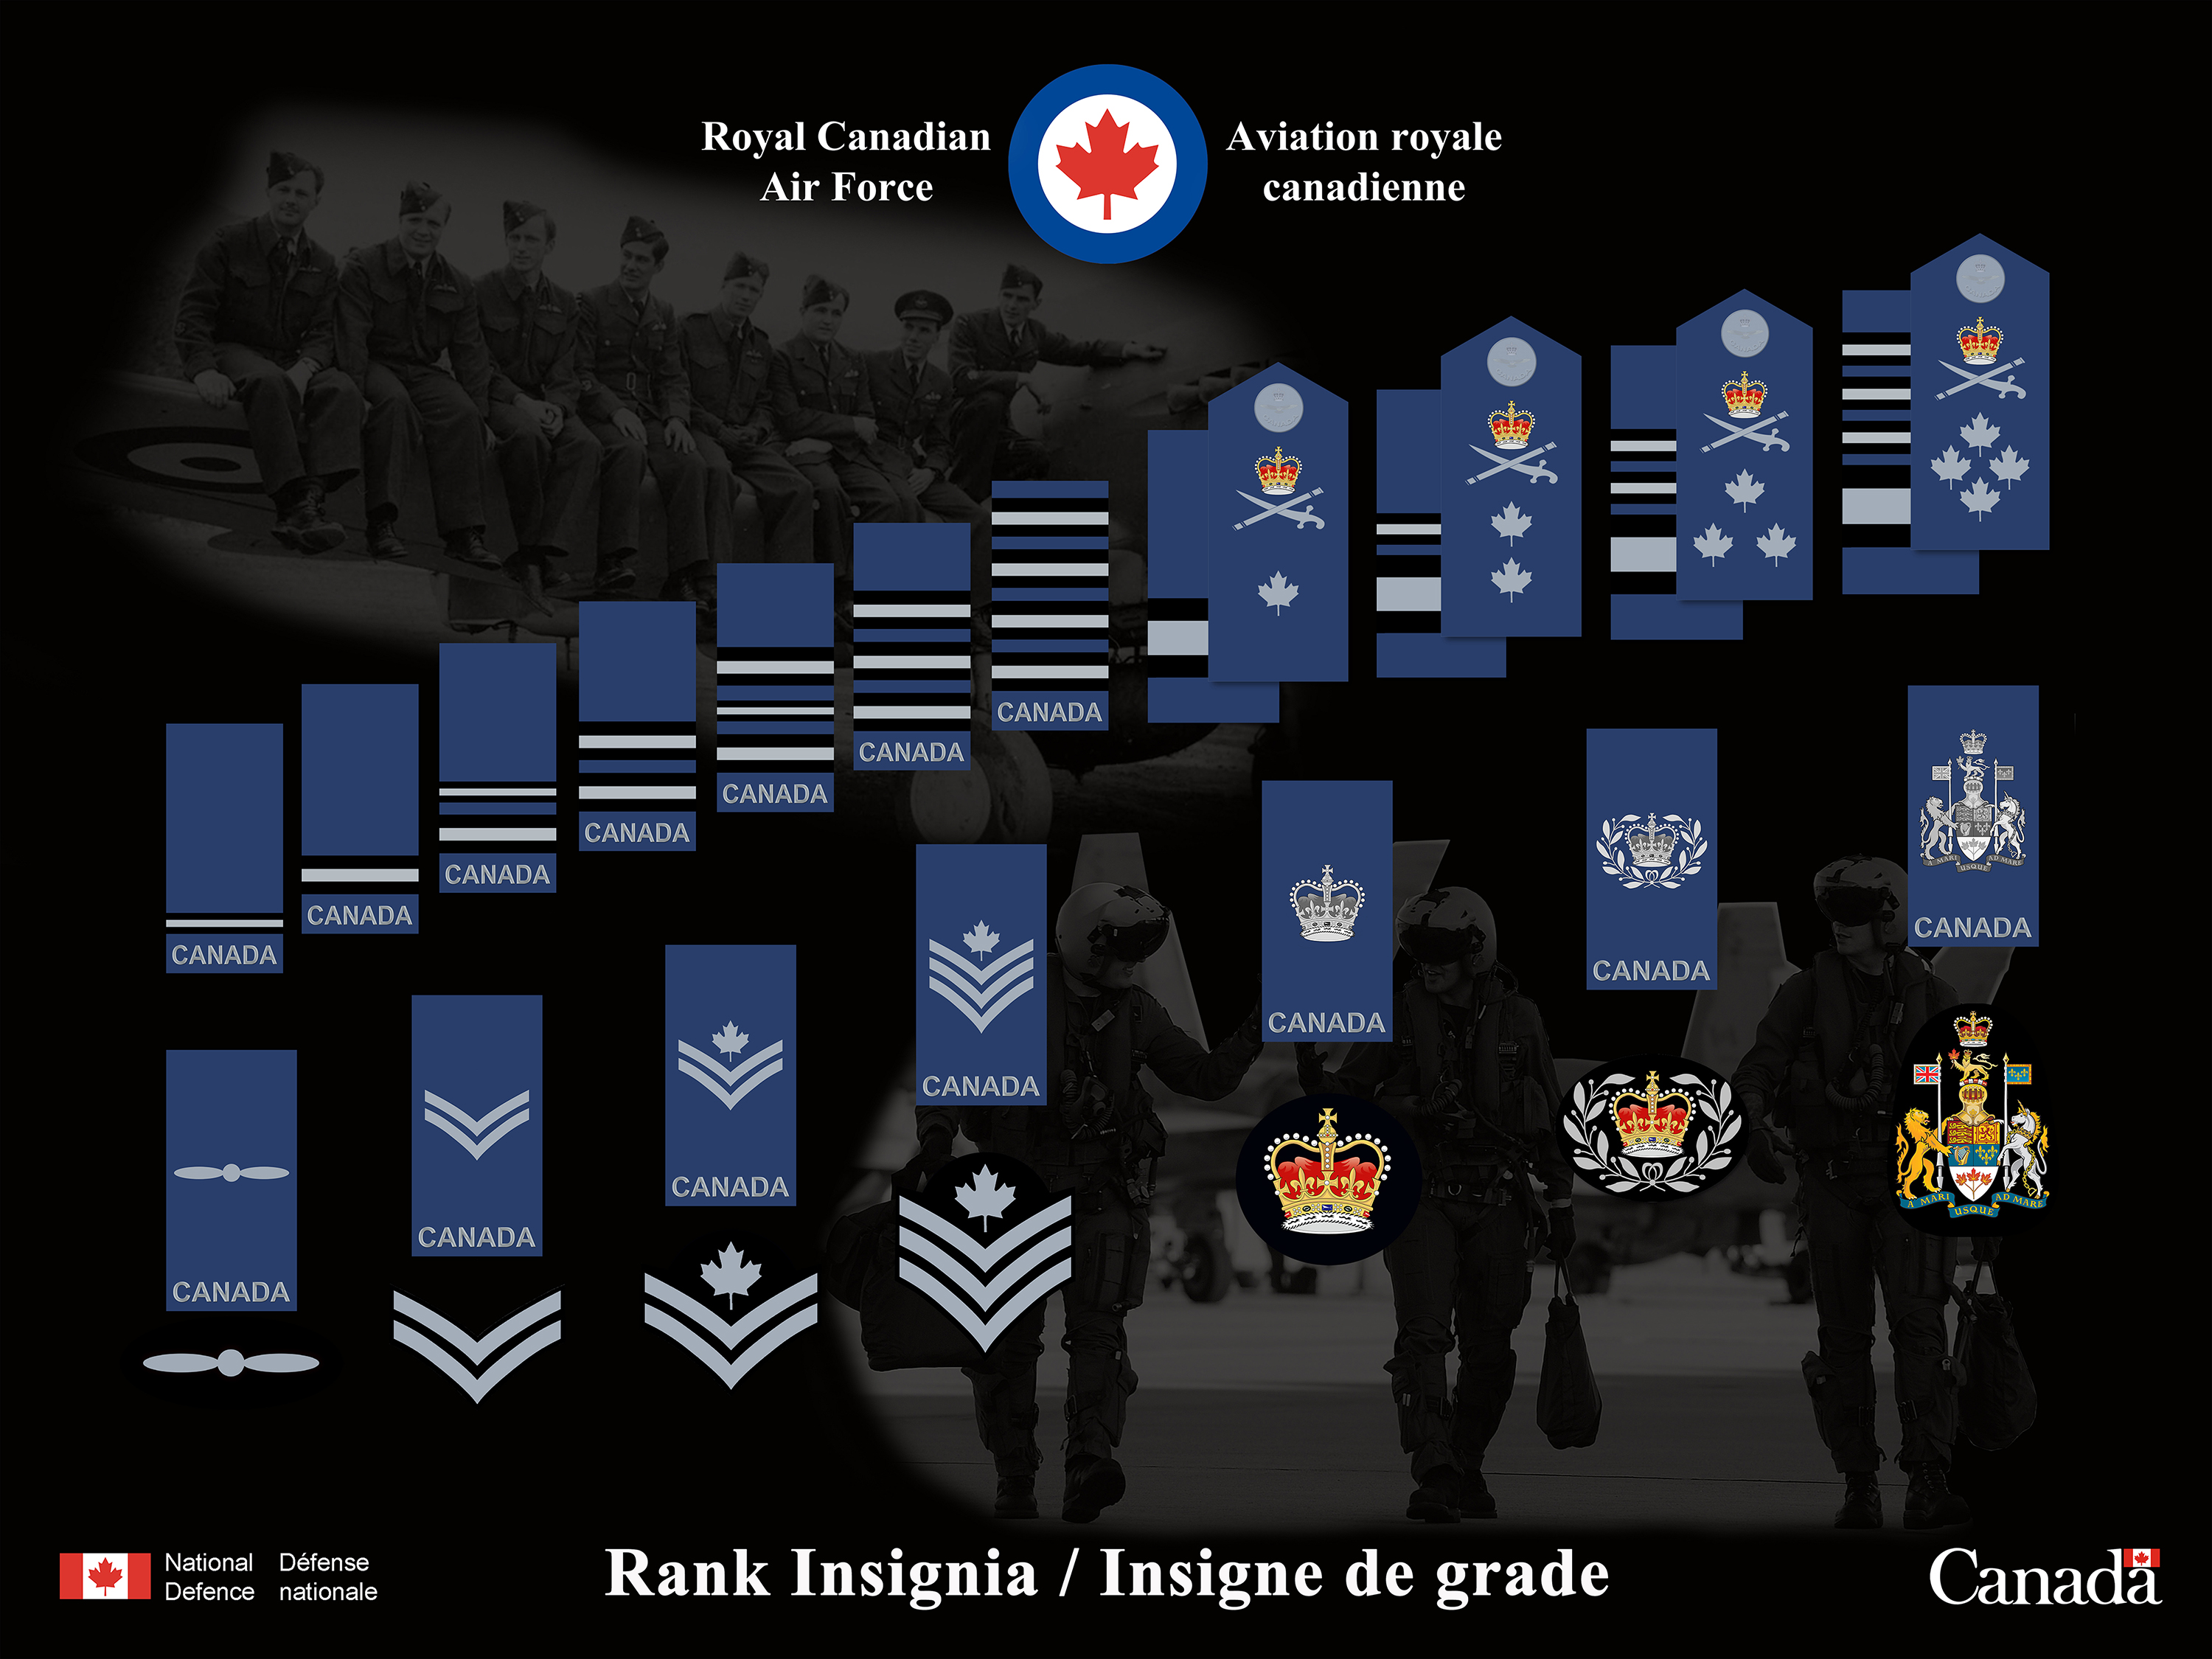 The RCAF’s new rank insignia